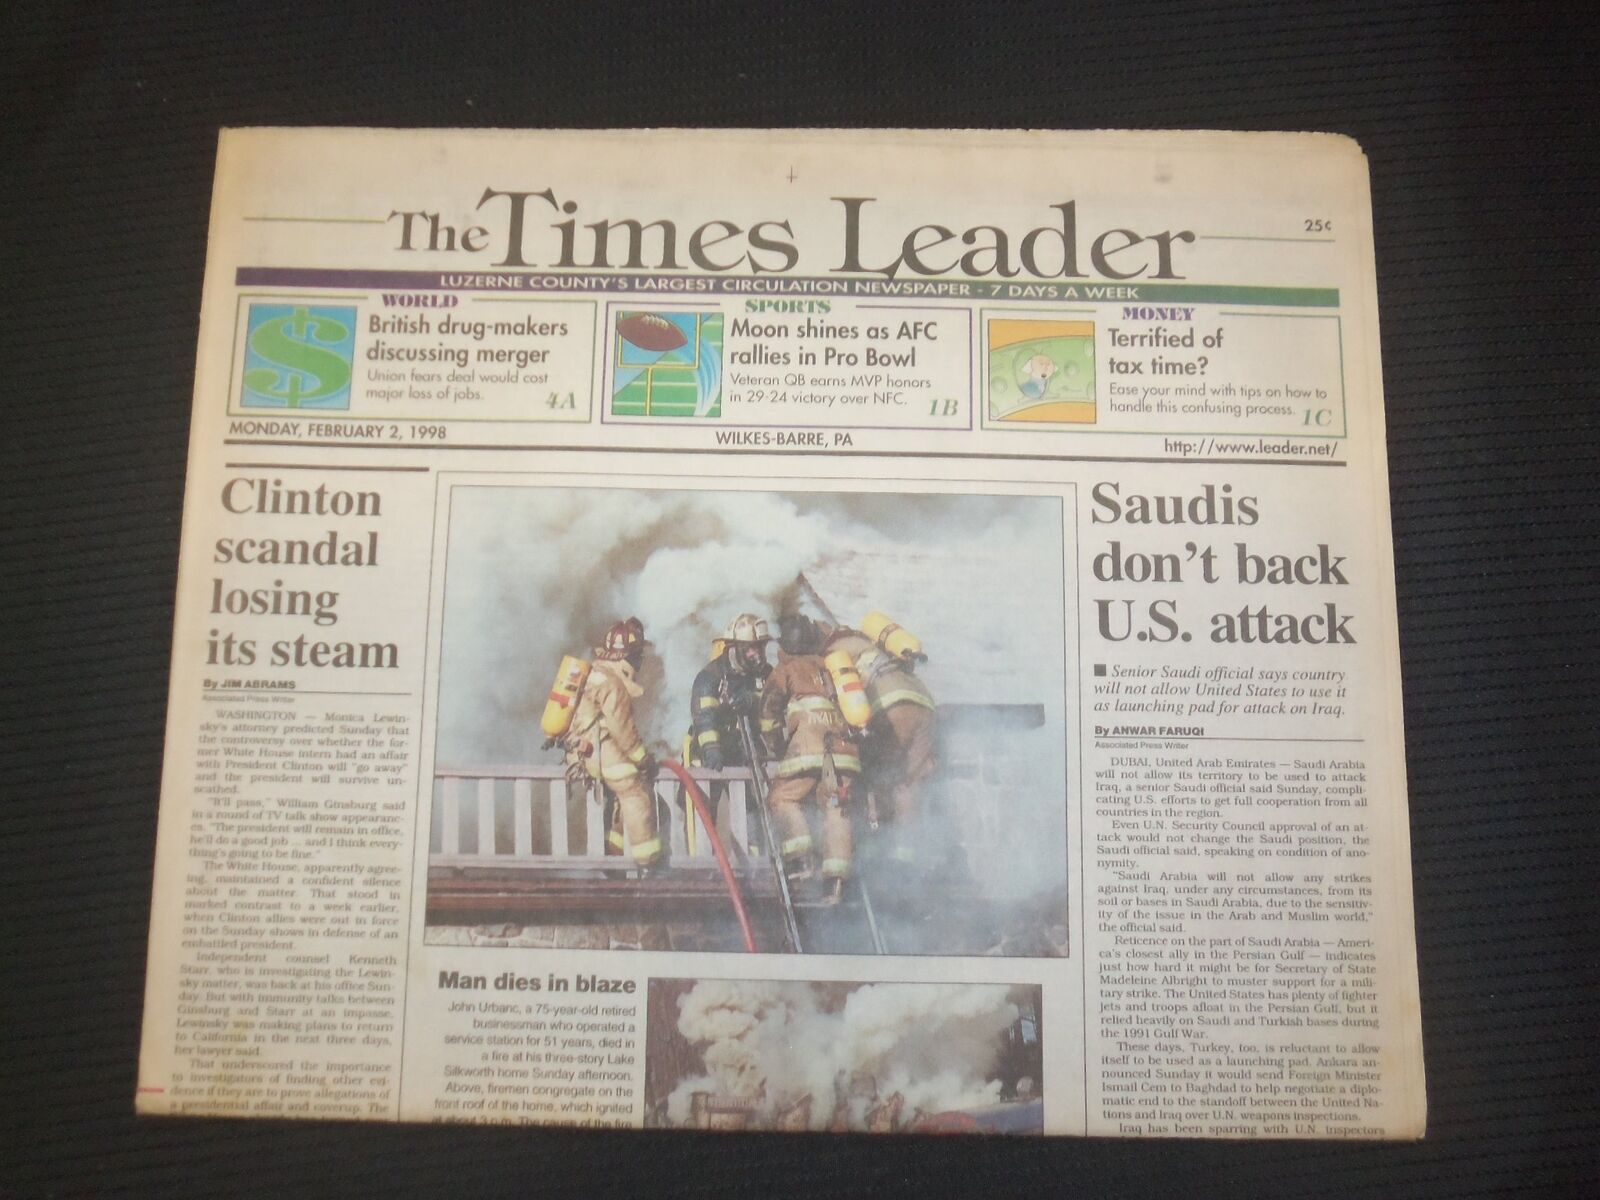 1998 FEB 2 WILKES-BARRE TIMES LEADER - SAUDIS DON'T BACK U.S. ATTACK - NP 7493